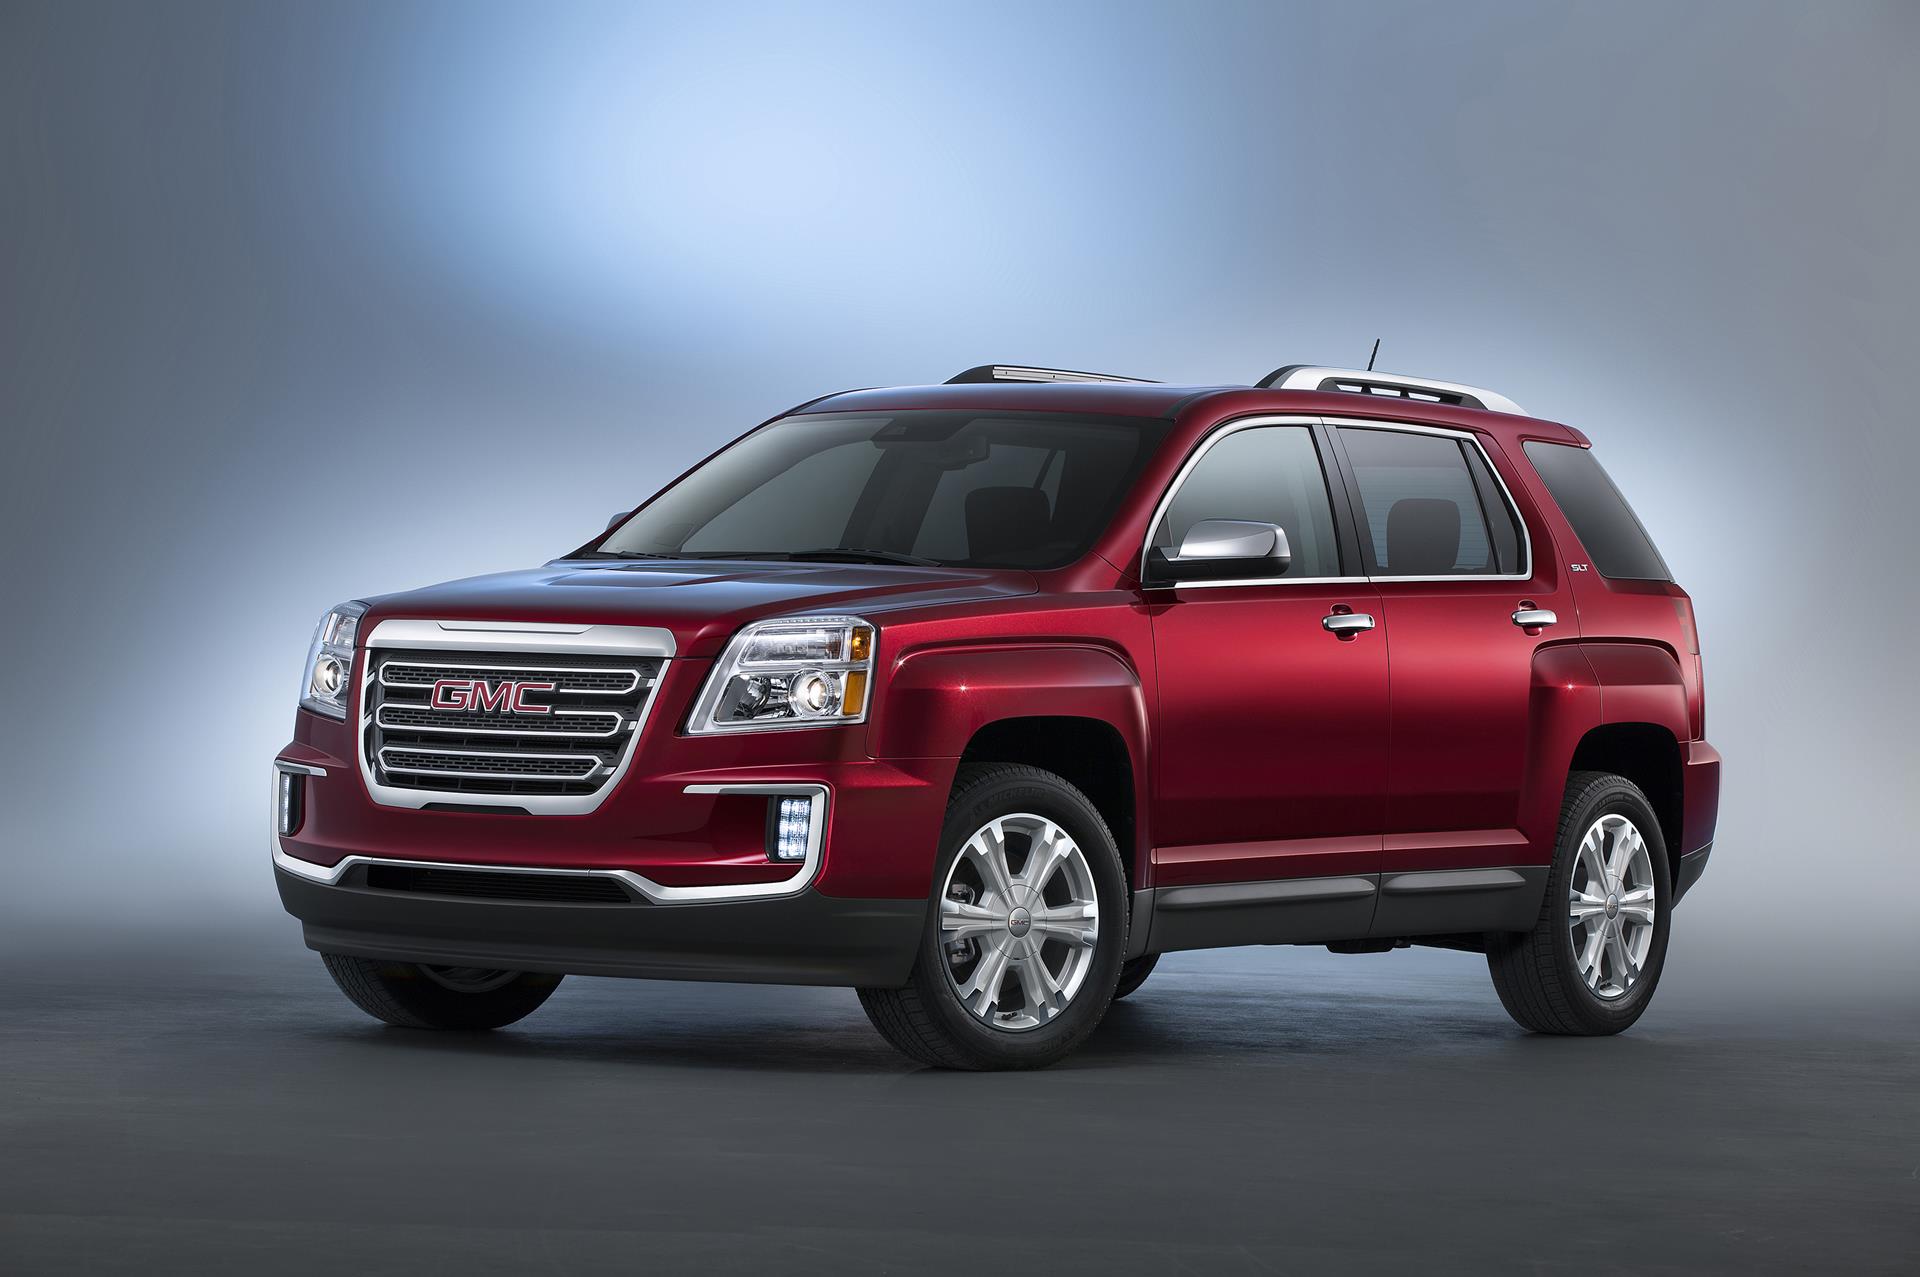 2016 GMC Terrain Technical And Mechanical Specifications